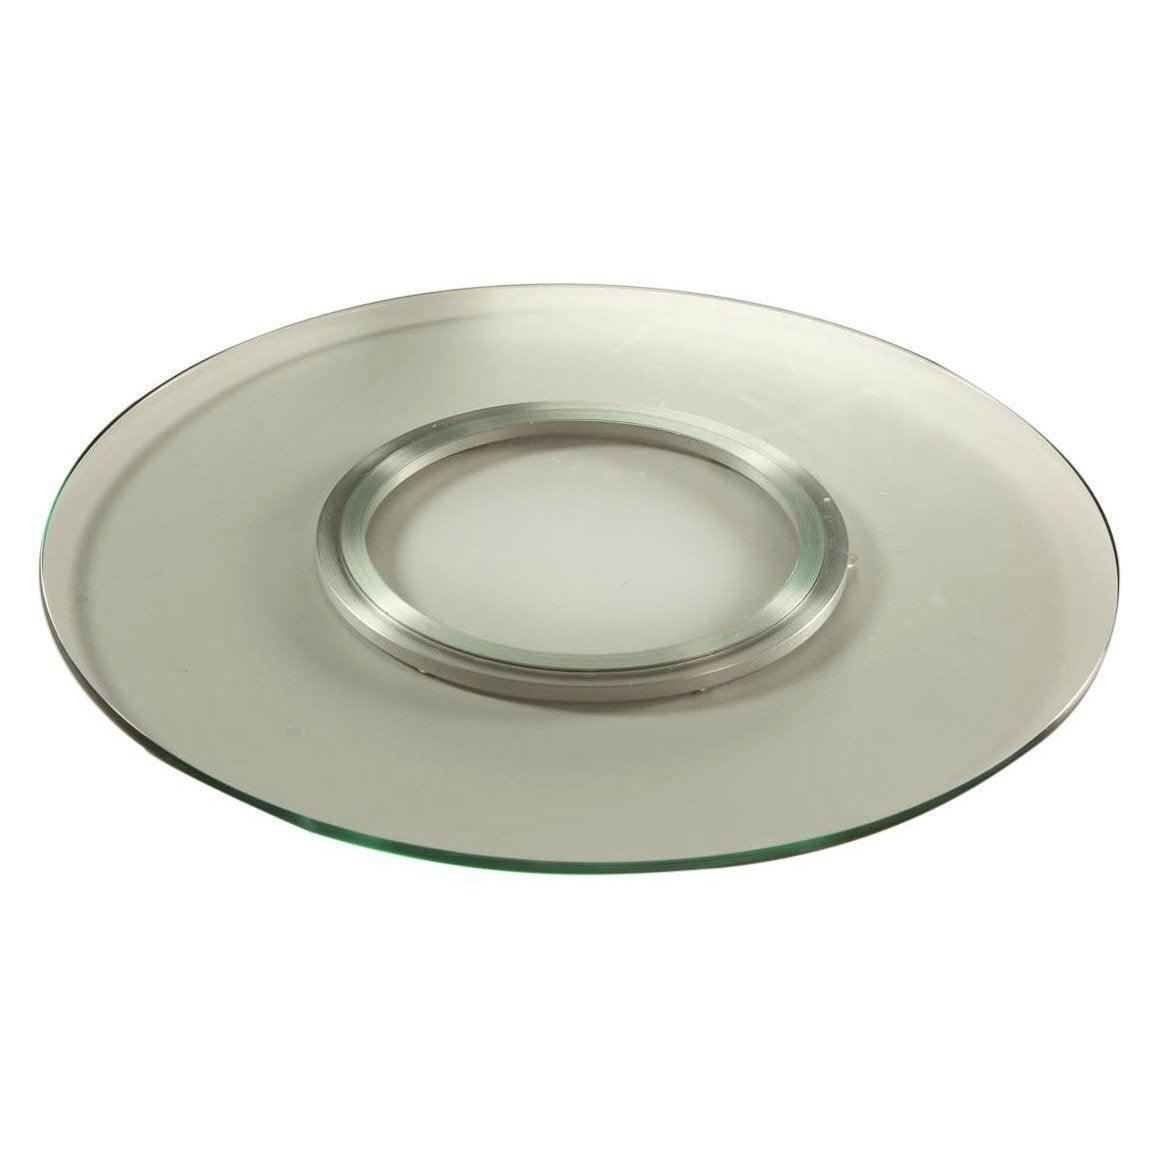 bearings for lazy susan tables heavy